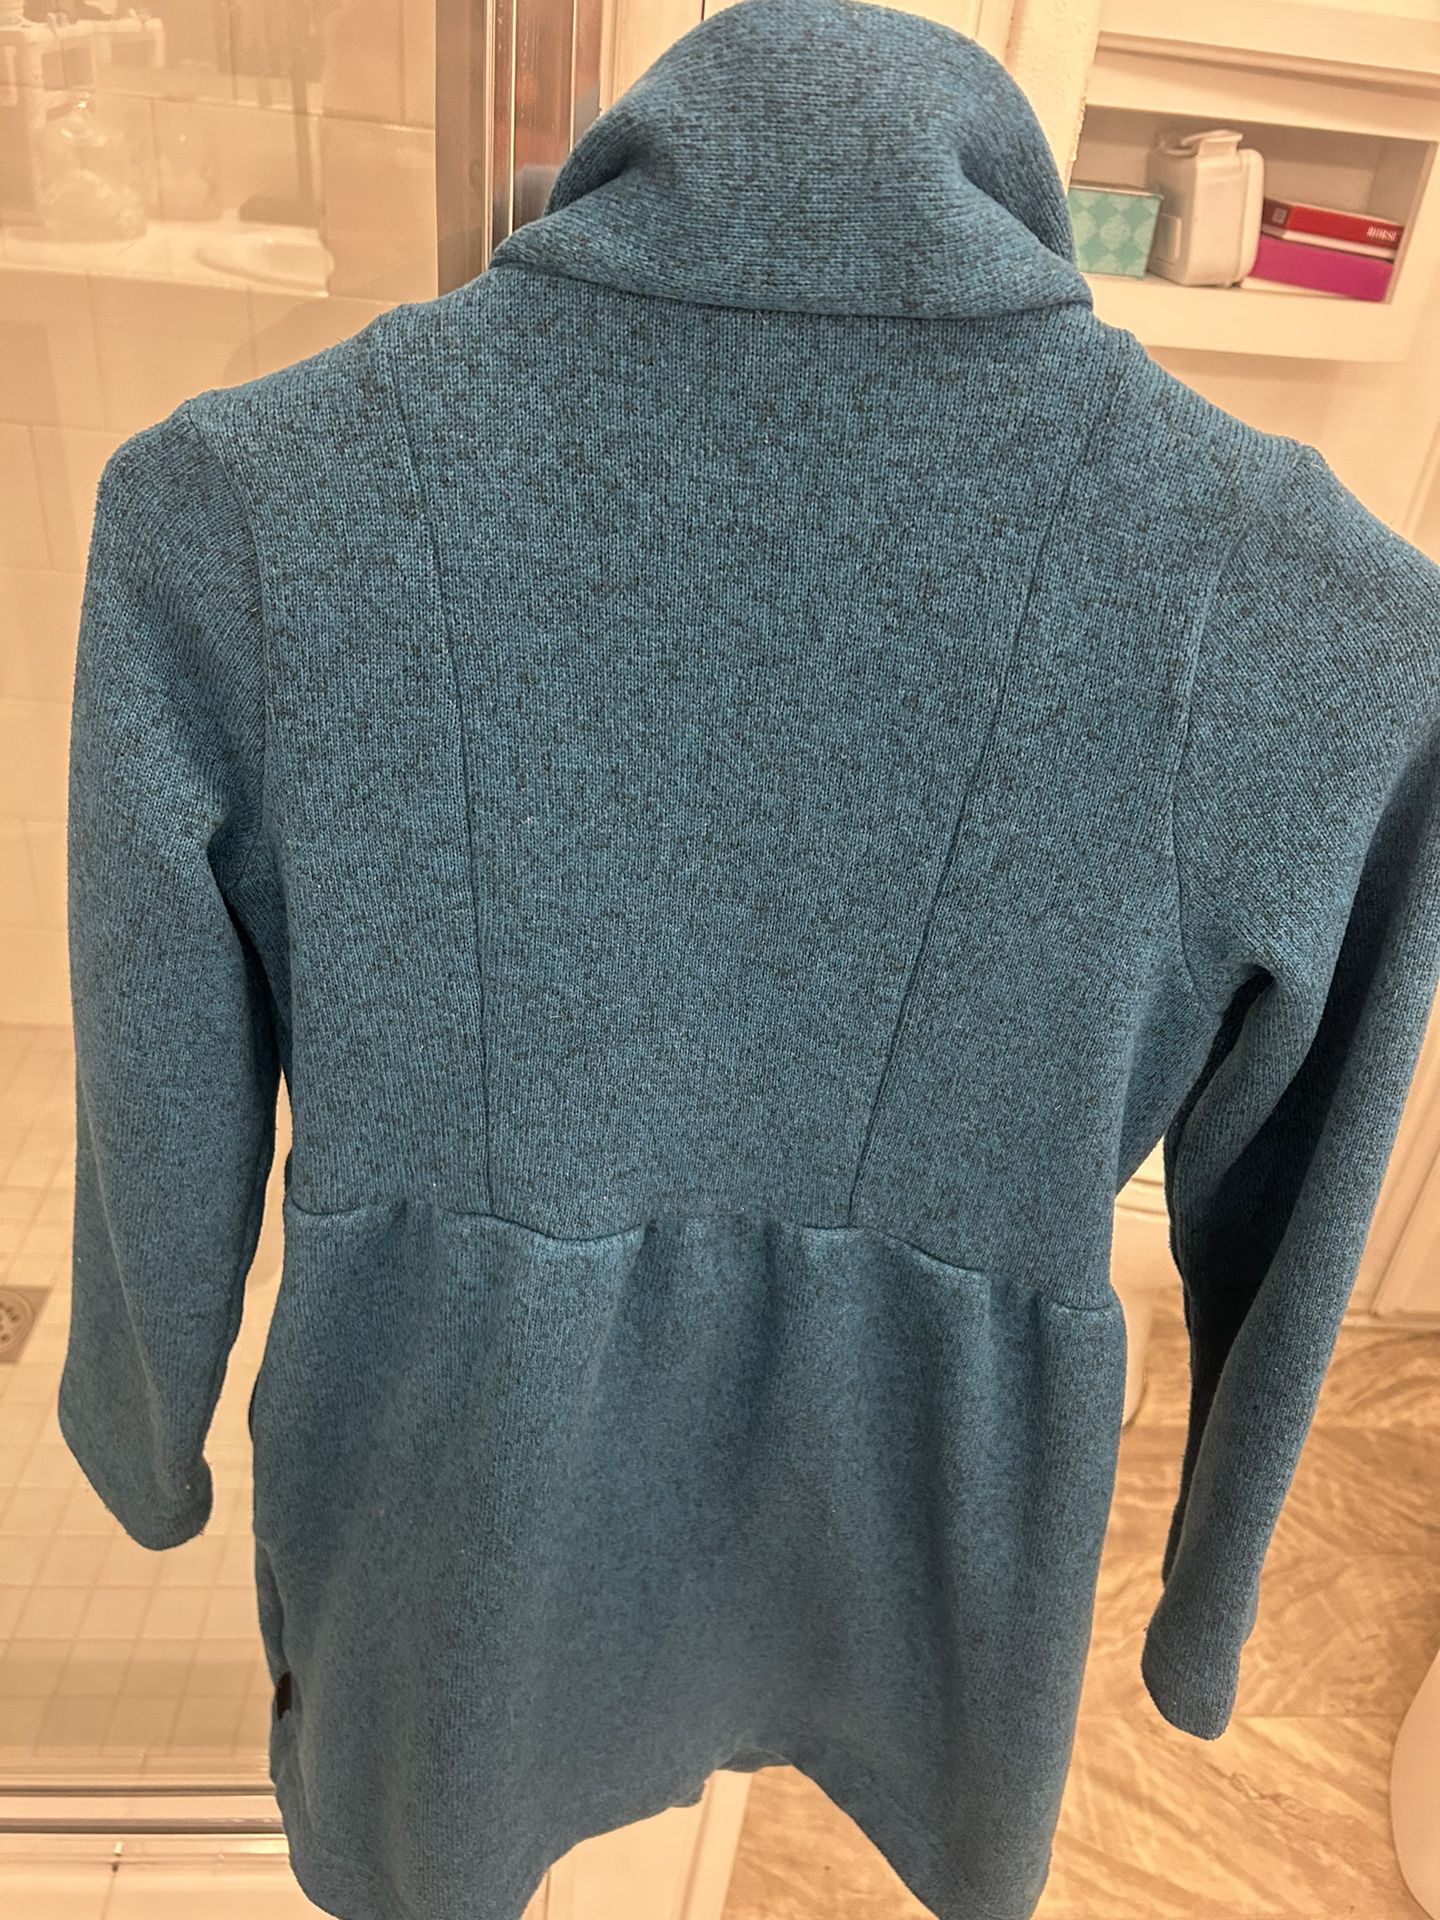 Patagonia Jacket for Sale in Ventura, CA - OfferUp